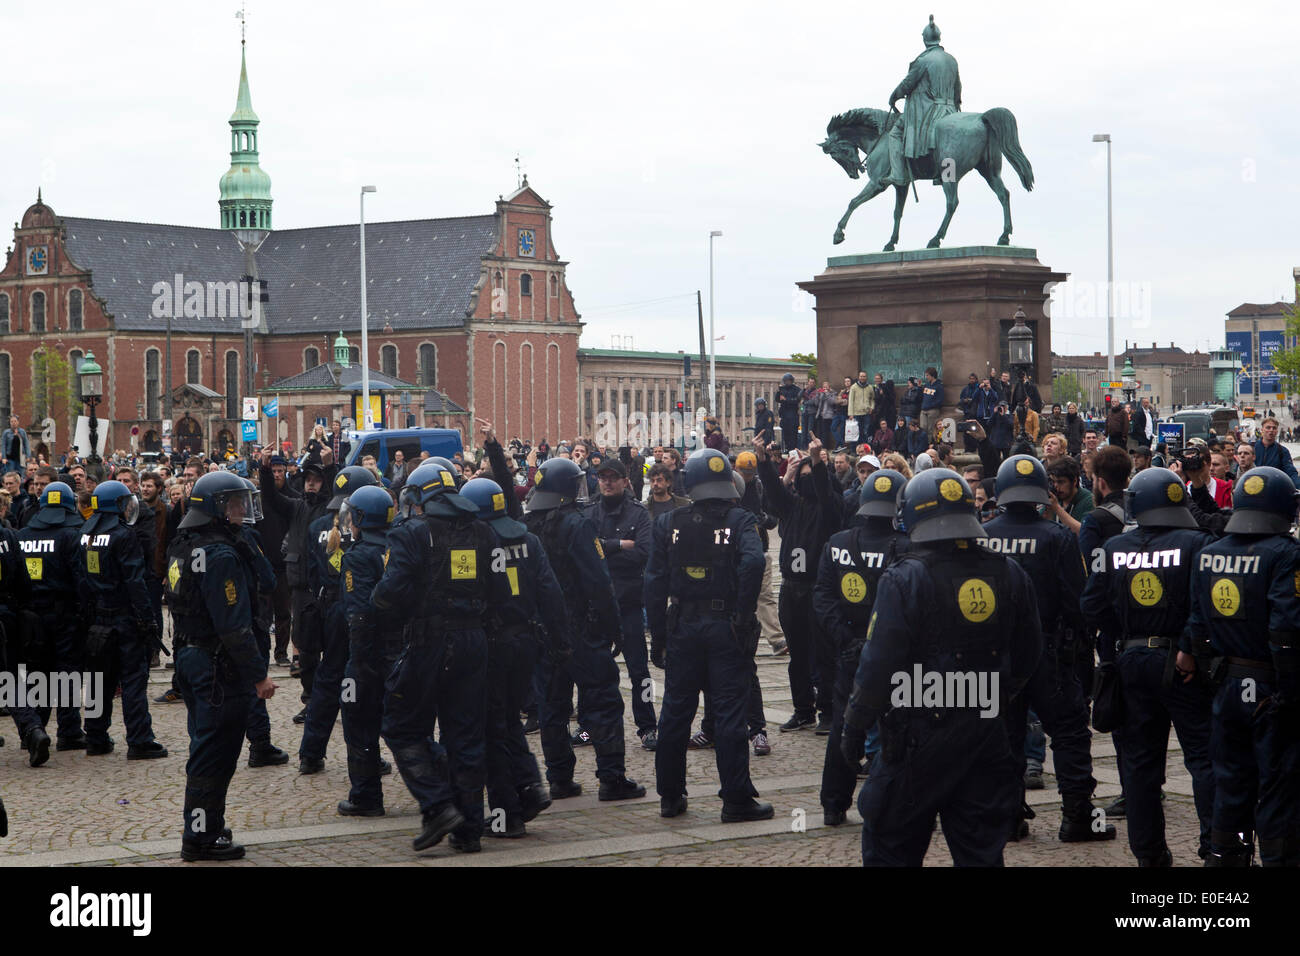 Copenhagen, Denmark, 10th May, 2014. Danish neo-Nazi party (Denmark Nationale Front, DNF) demonstration in front of the parliament under the slogan: “No to Islamization” took place under heavy police protection and was finally interrupted by an anti fascist counter-demonstration. Eventually police cleared the square. This took place just a few hours before the Eurovision Song Contest final. Credit:  OJPHOTOS/Alamy Live News Stock Photo